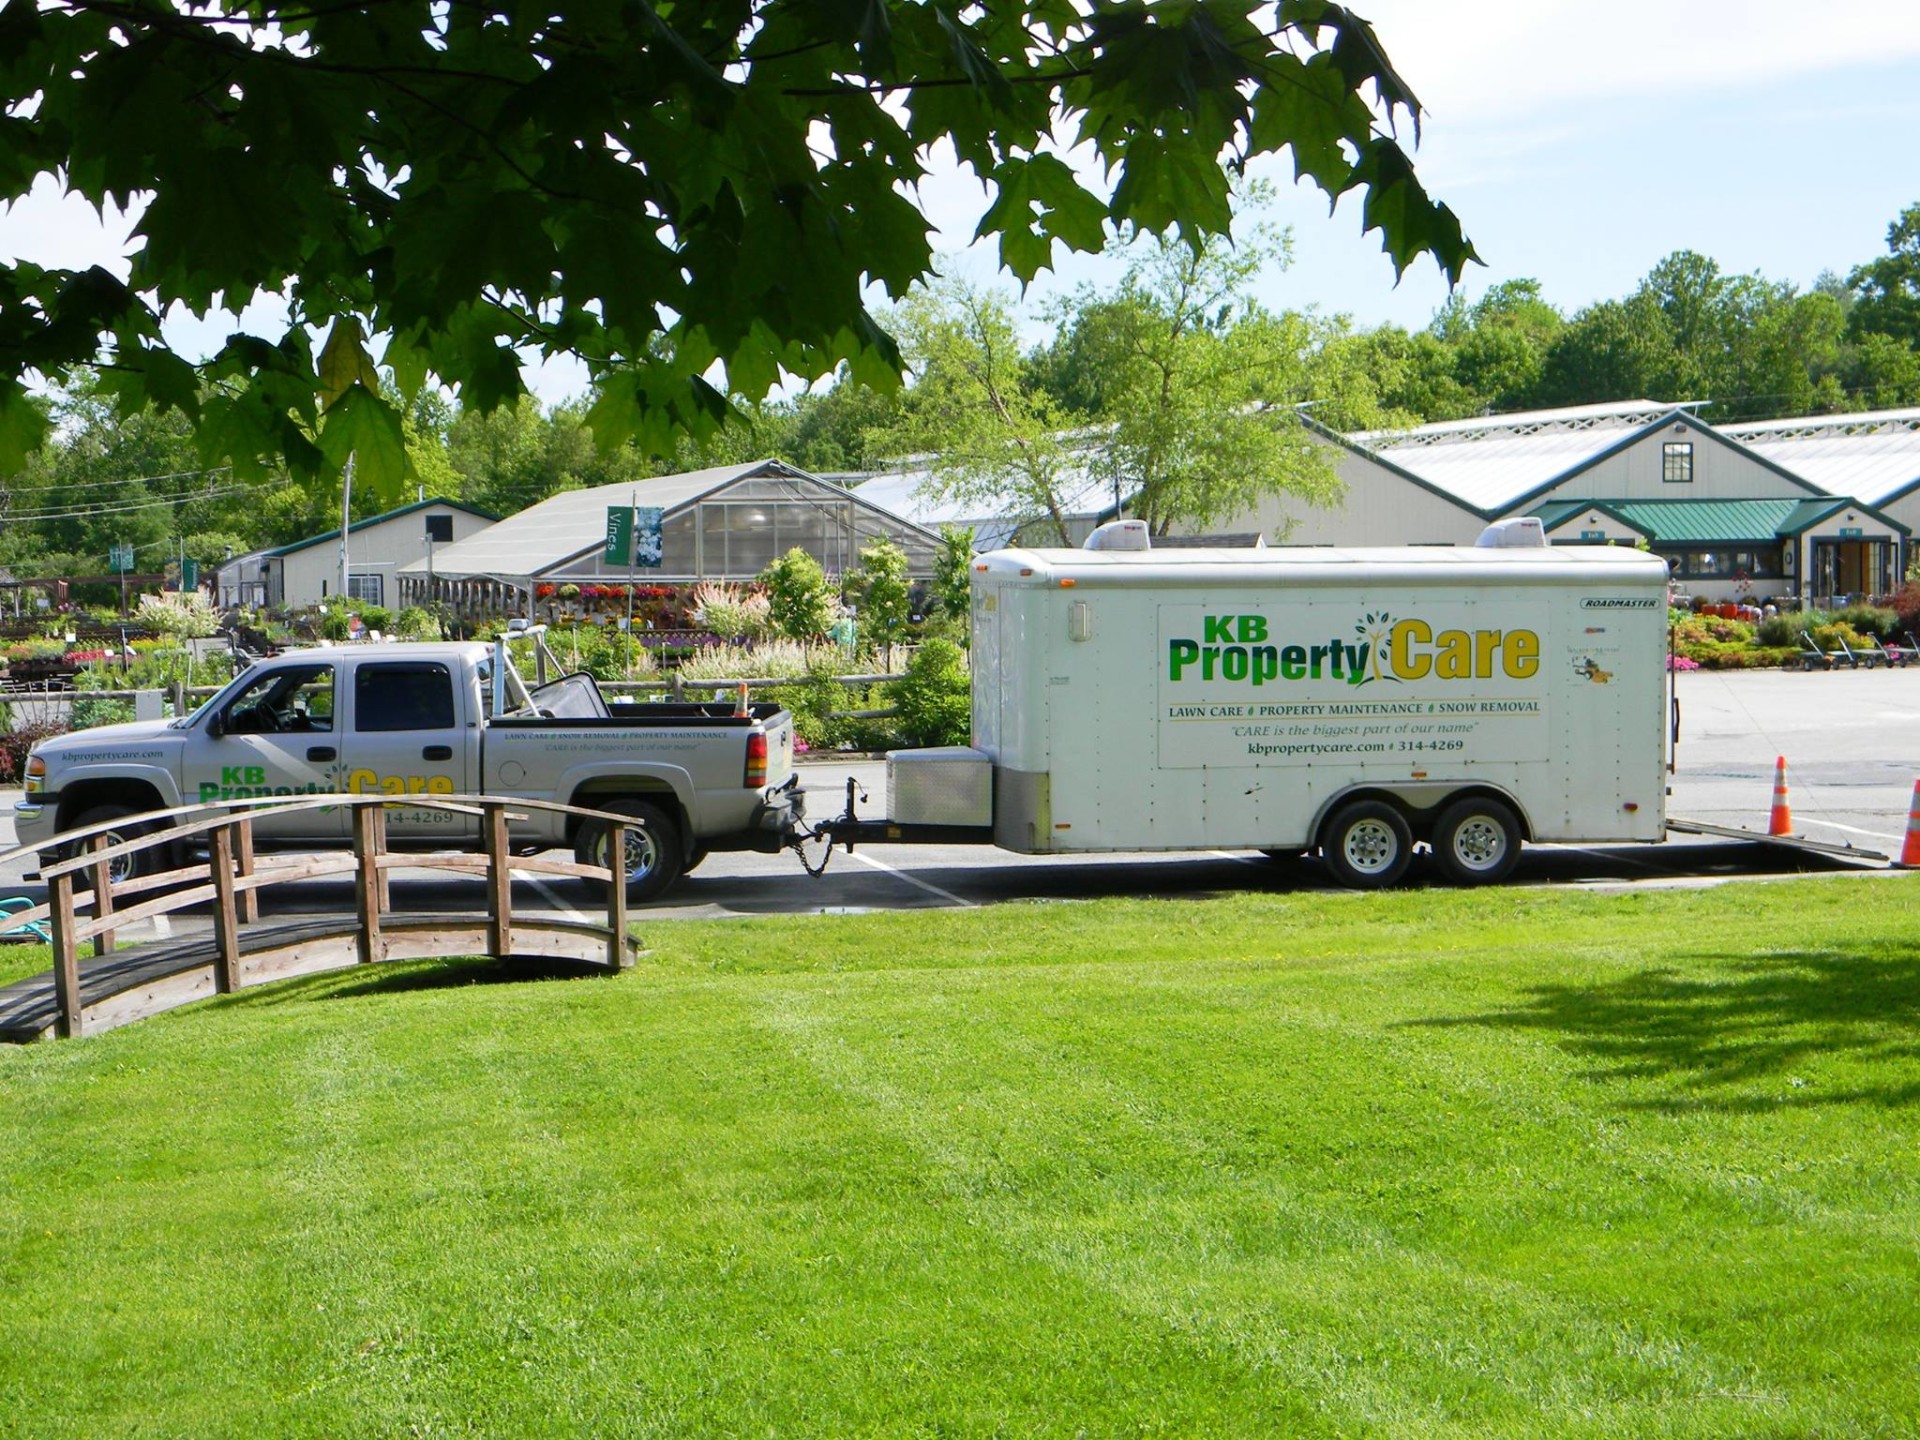 Lawn Care in Central Maine